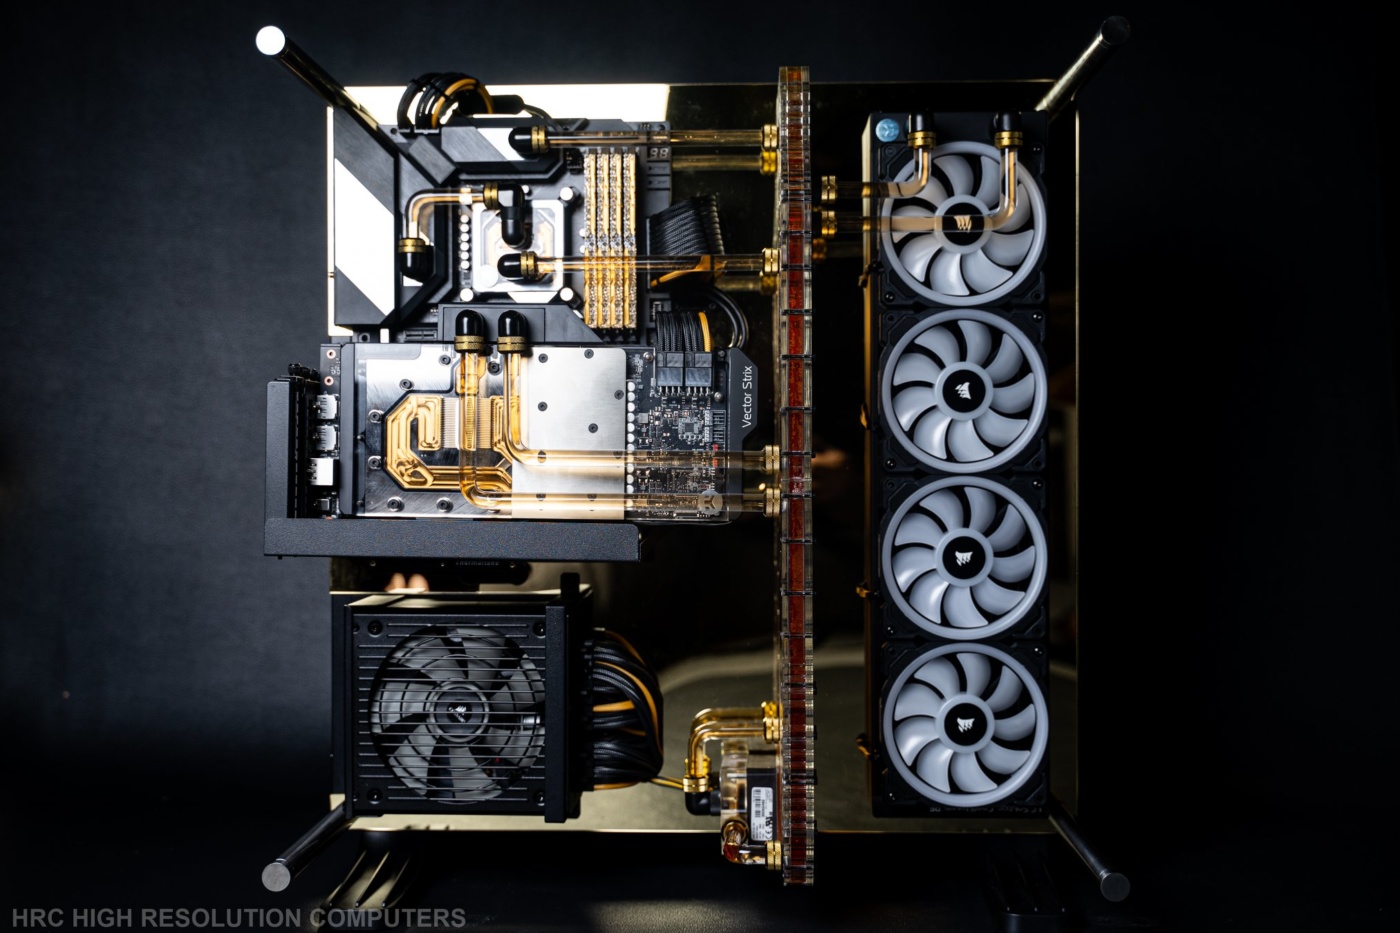 amazing gaming machines - thermaltake core p5 modding - Gian 00000 Vector Strix Eur Hrc High Resolution Computers